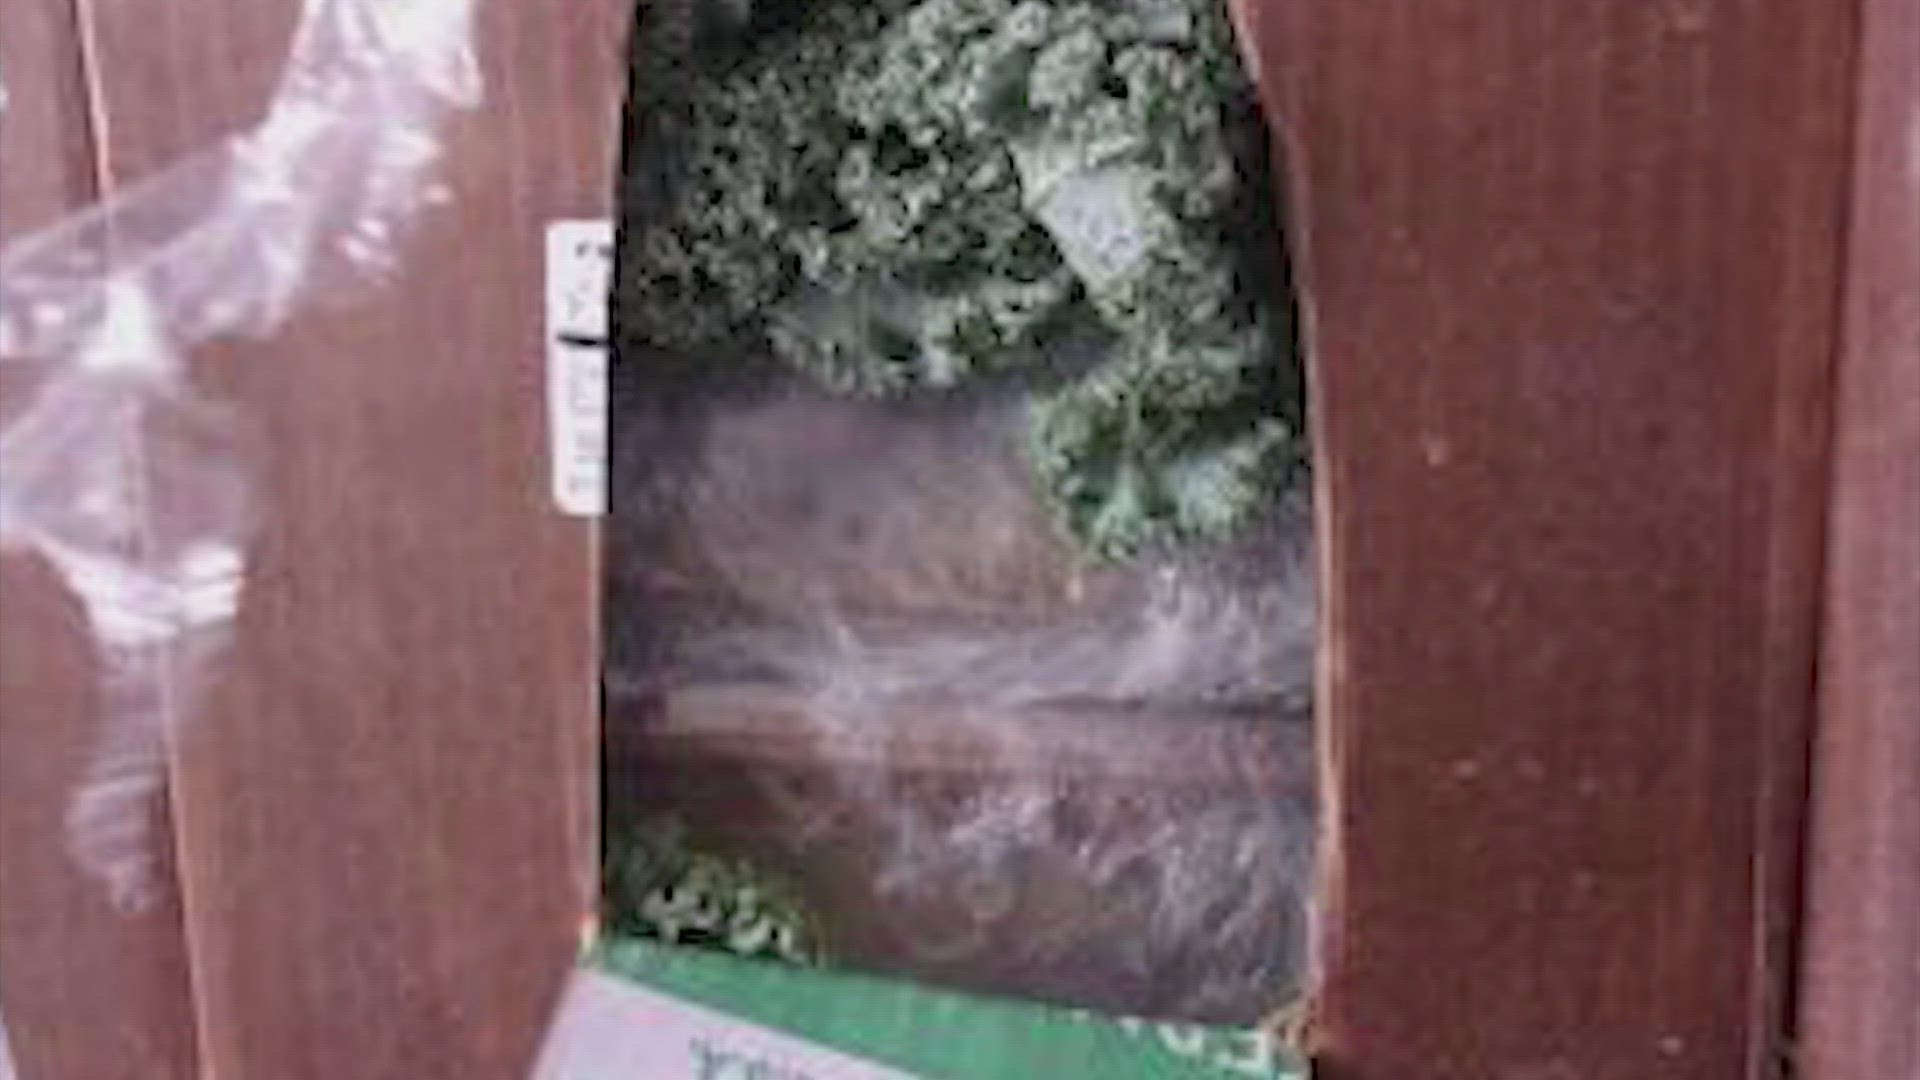 U.S. Customs and Border Protection officers at Otay Mesa Cargo Facility seized $38 million worth of methamphetamine hidden inside a shipment of kale.